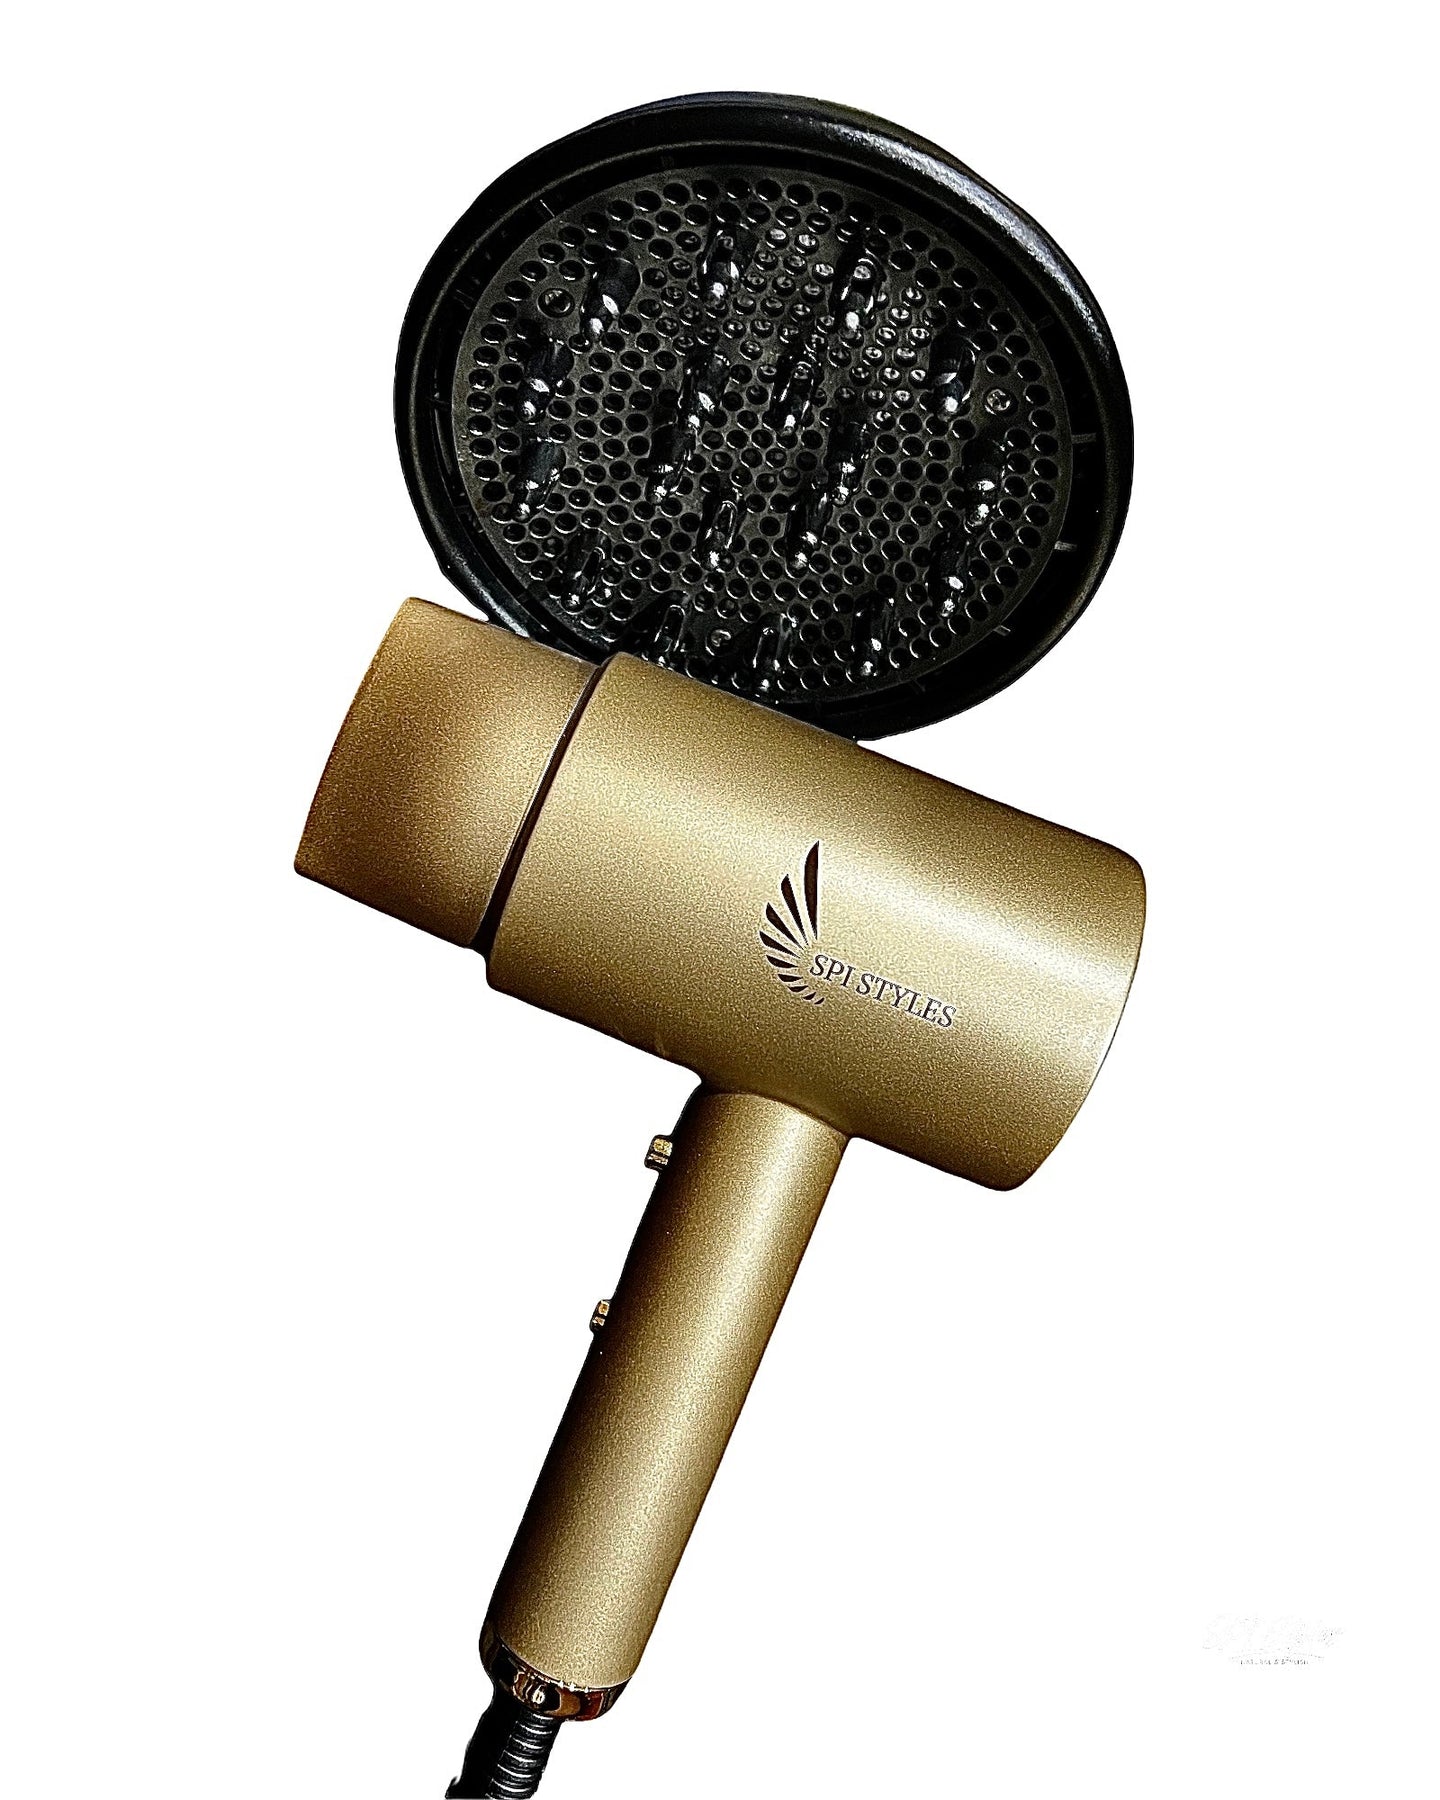 Super Dry PRO Gold Hair Dryer with Hot and Cool blower selections - SPI Styles